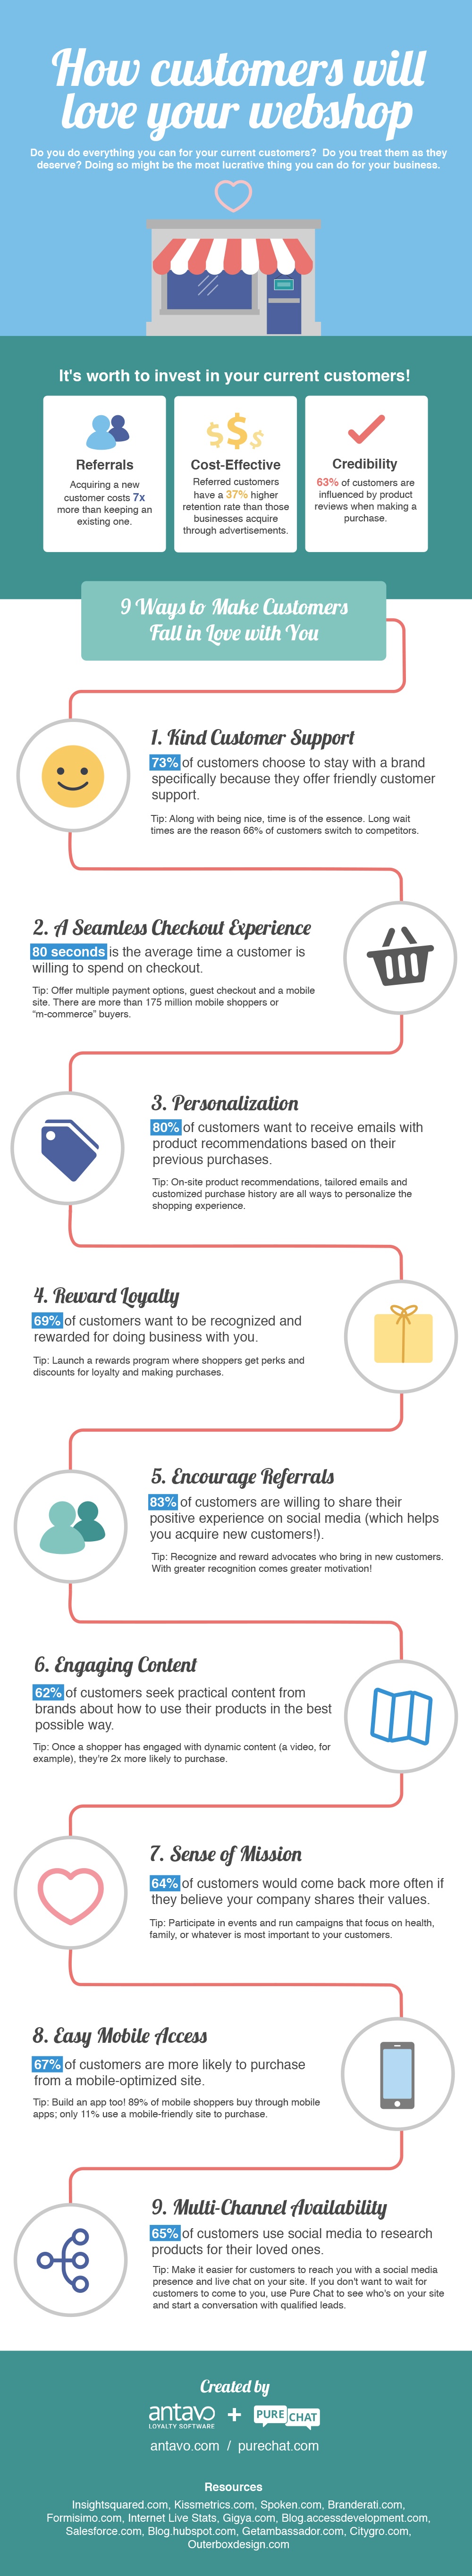 How_customers_will_love_your_webshop_infographic_antavo_purechat_full.jpg